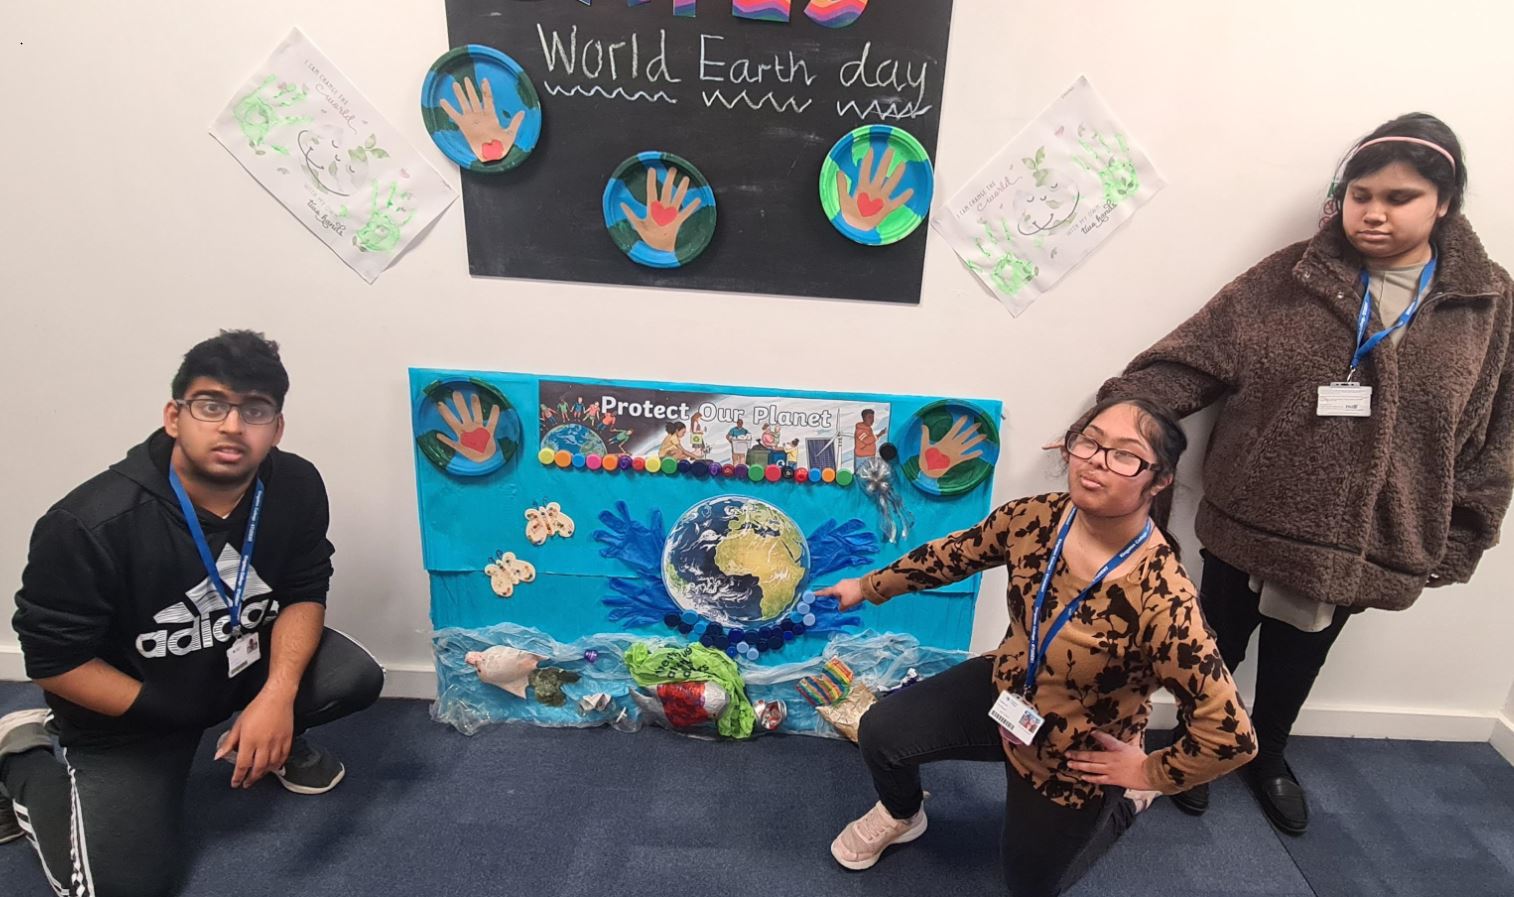 World Earth Day inspires Foundation Learning students